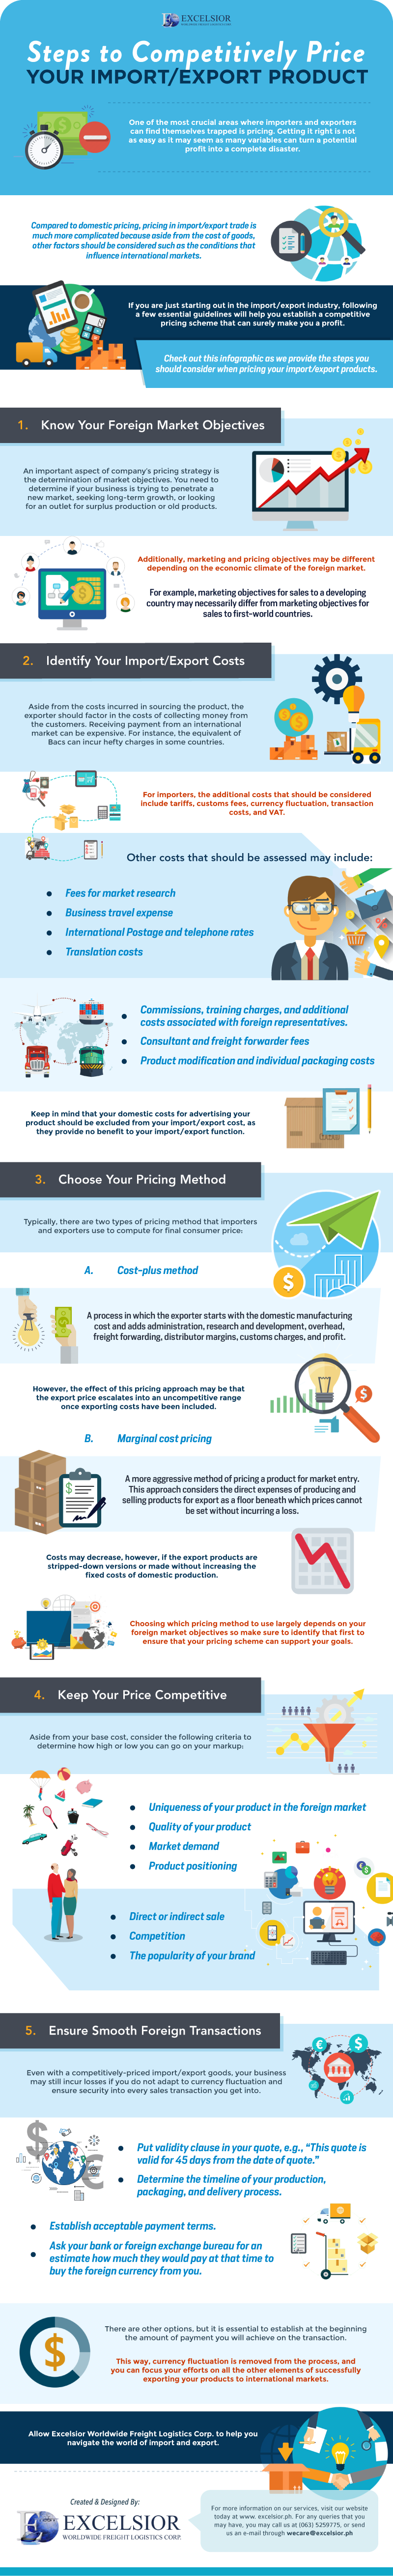 Steps to Competitively Price Your Import/Export Product